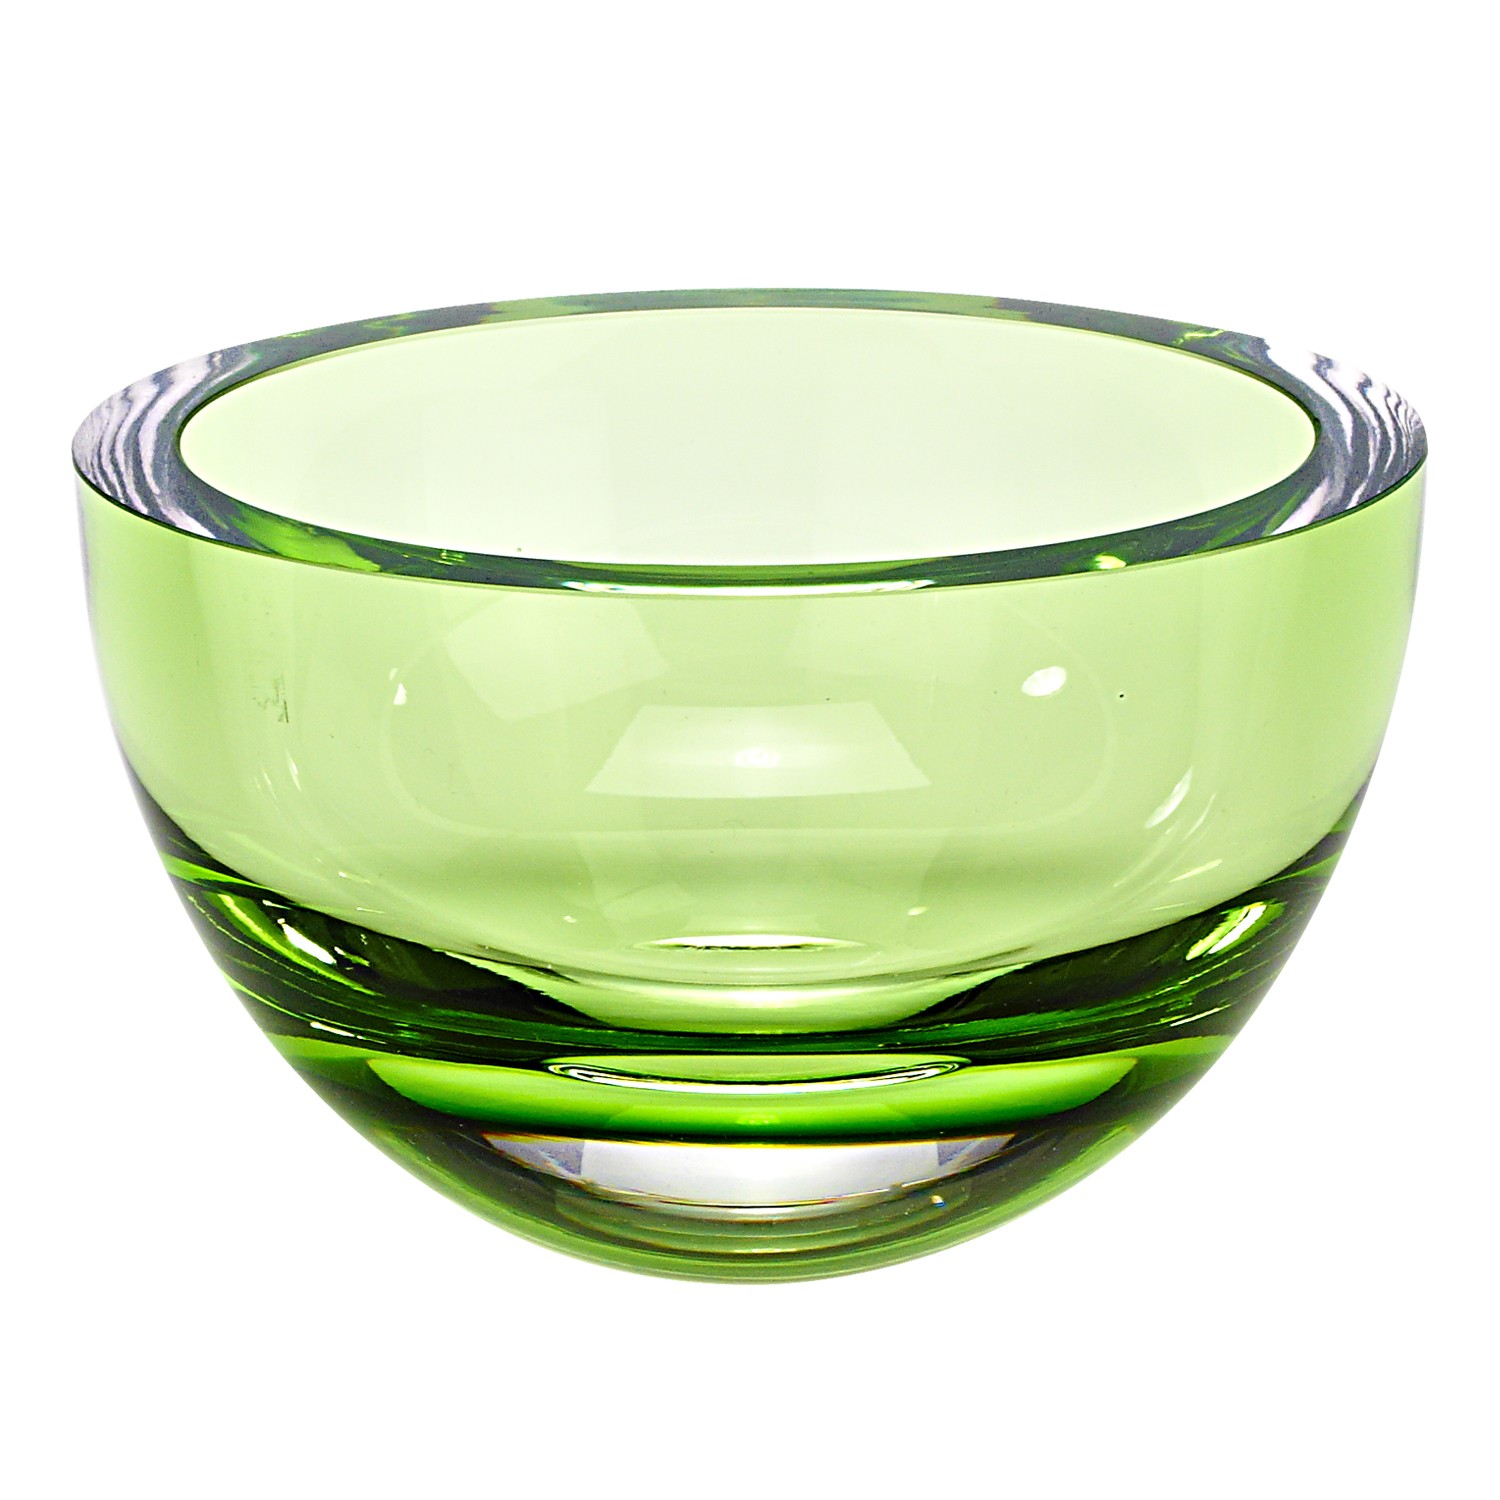 6" Mouth Blown Crystal European Made Lead Free Spring Green Bowl